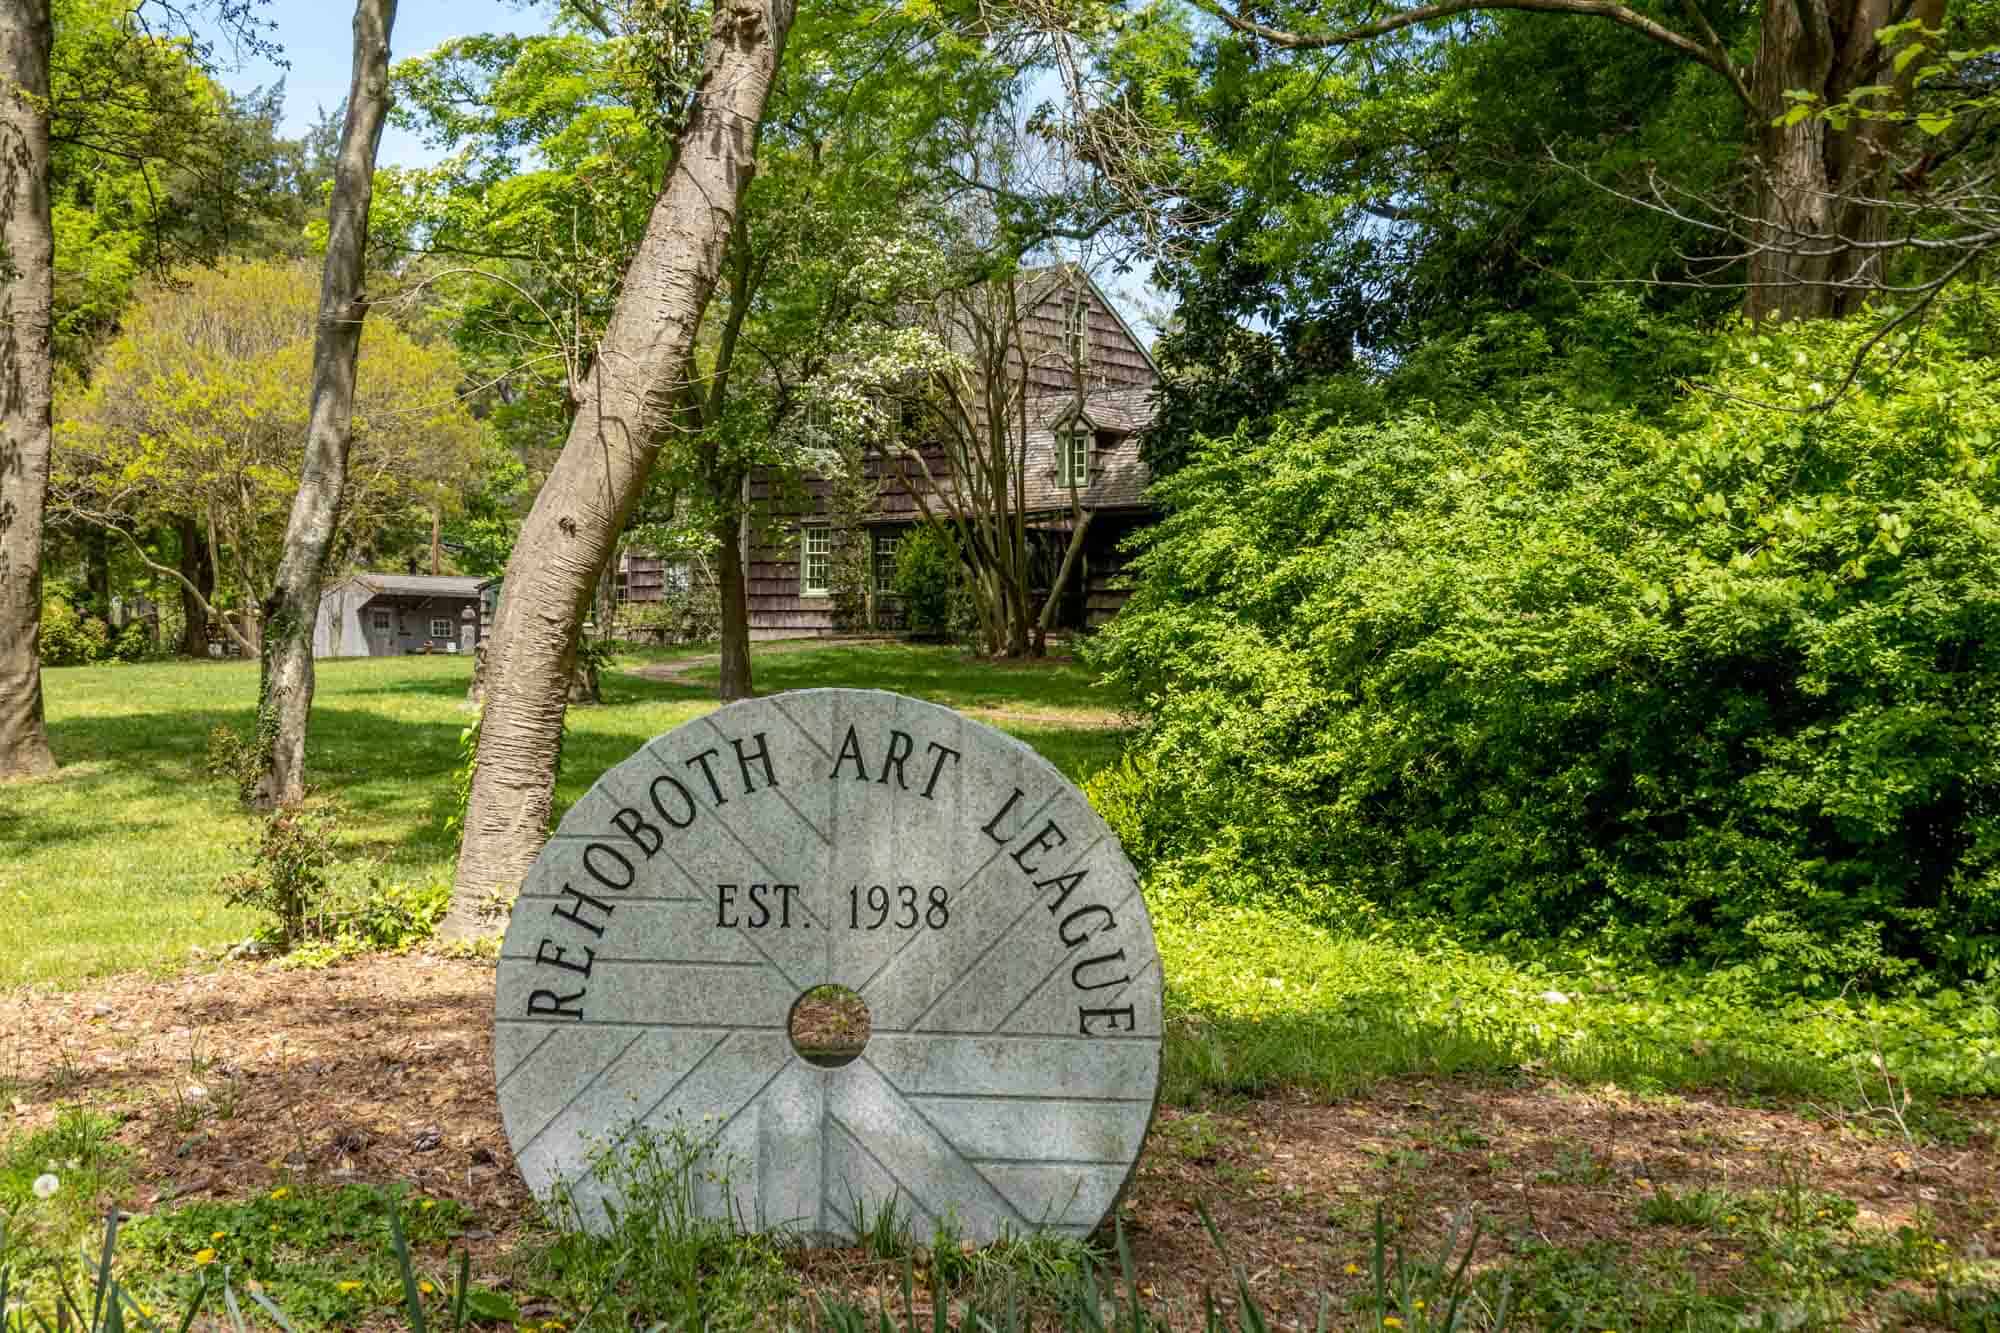 Circular sign: "Rehoboth Art League, Est. 1938) amidst trees and plants